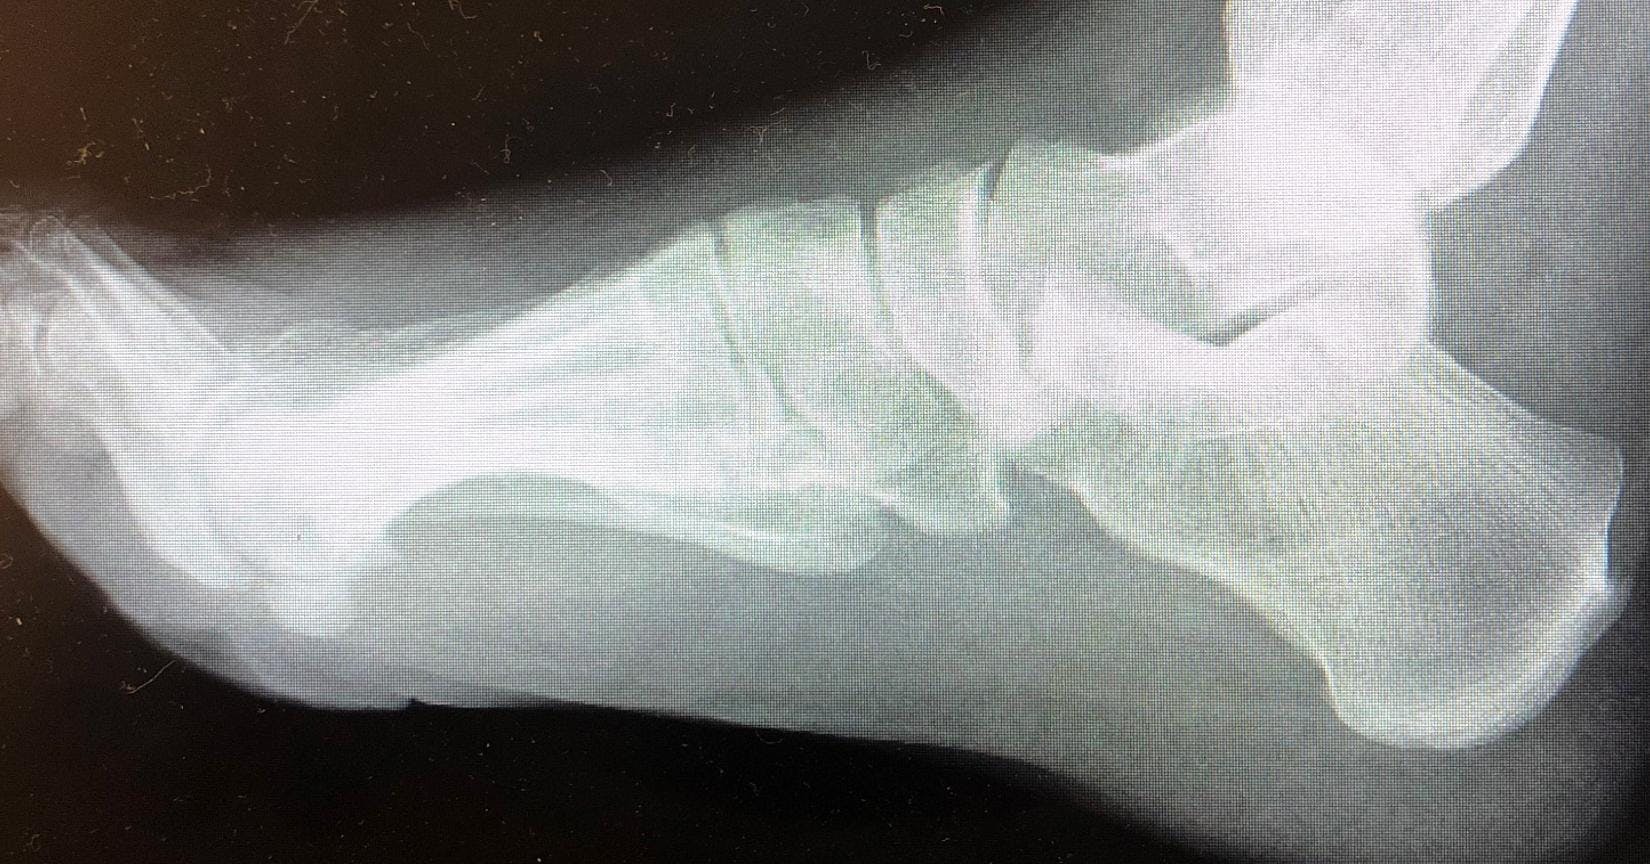 X-ray of a foot